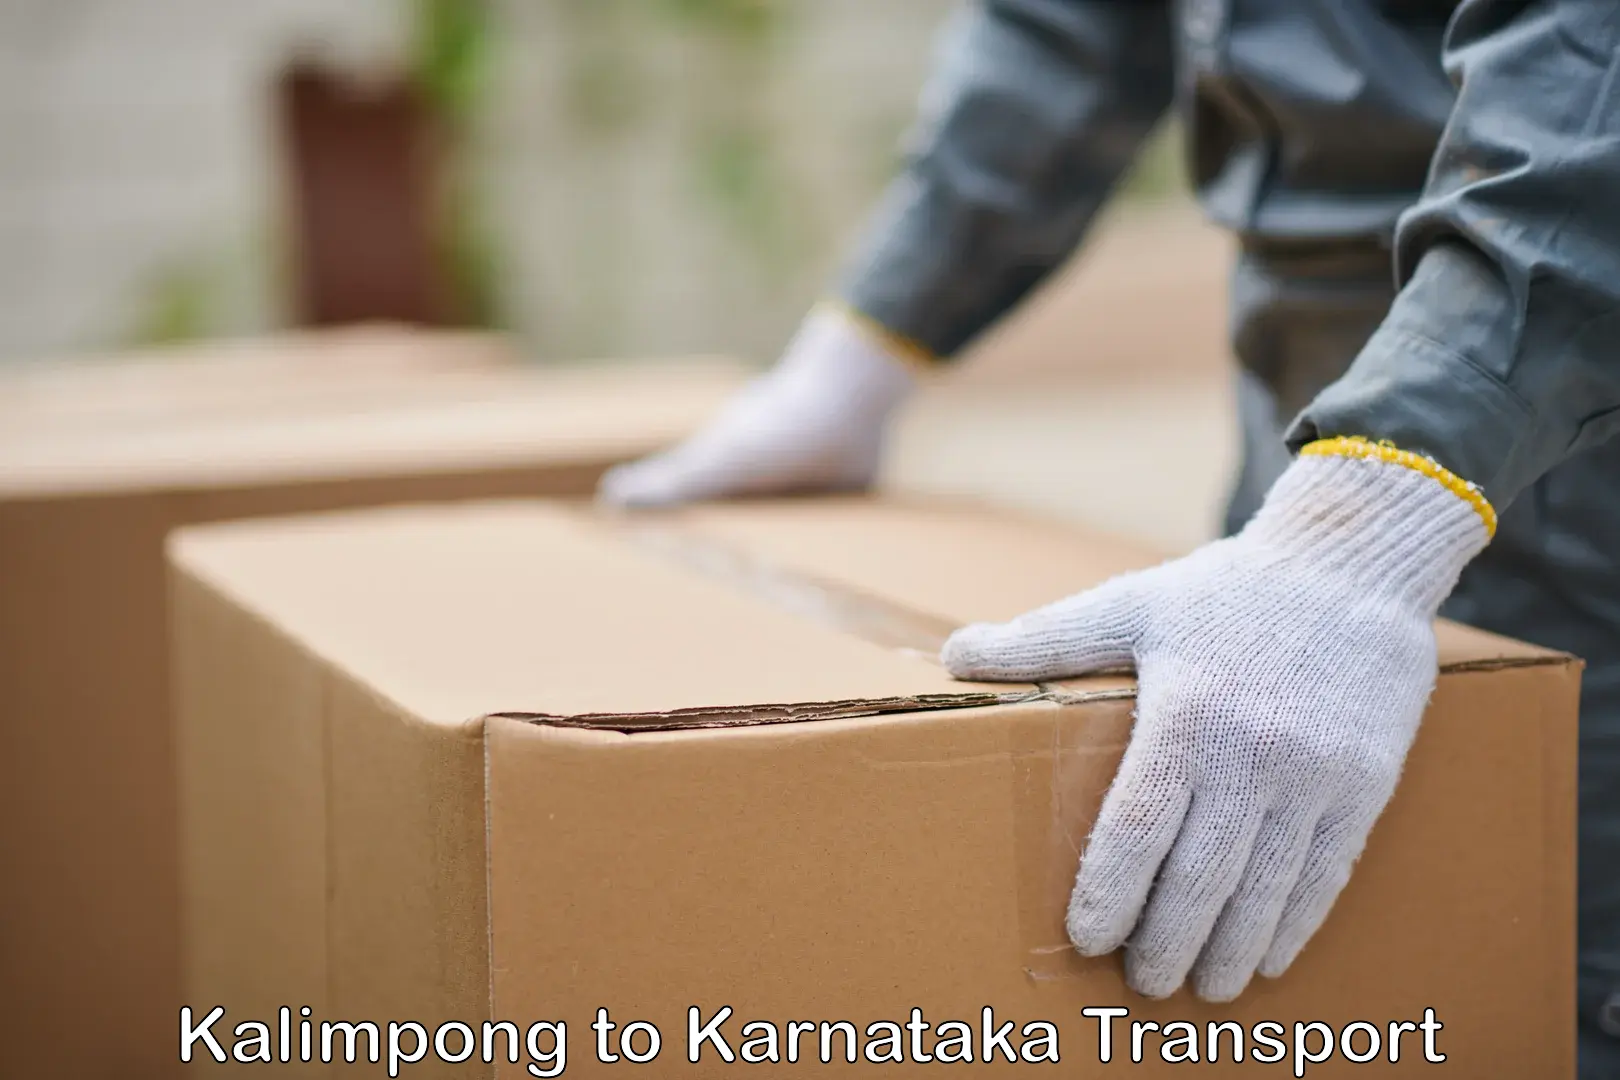 Commercial transport service Kalimpong to Bangalore